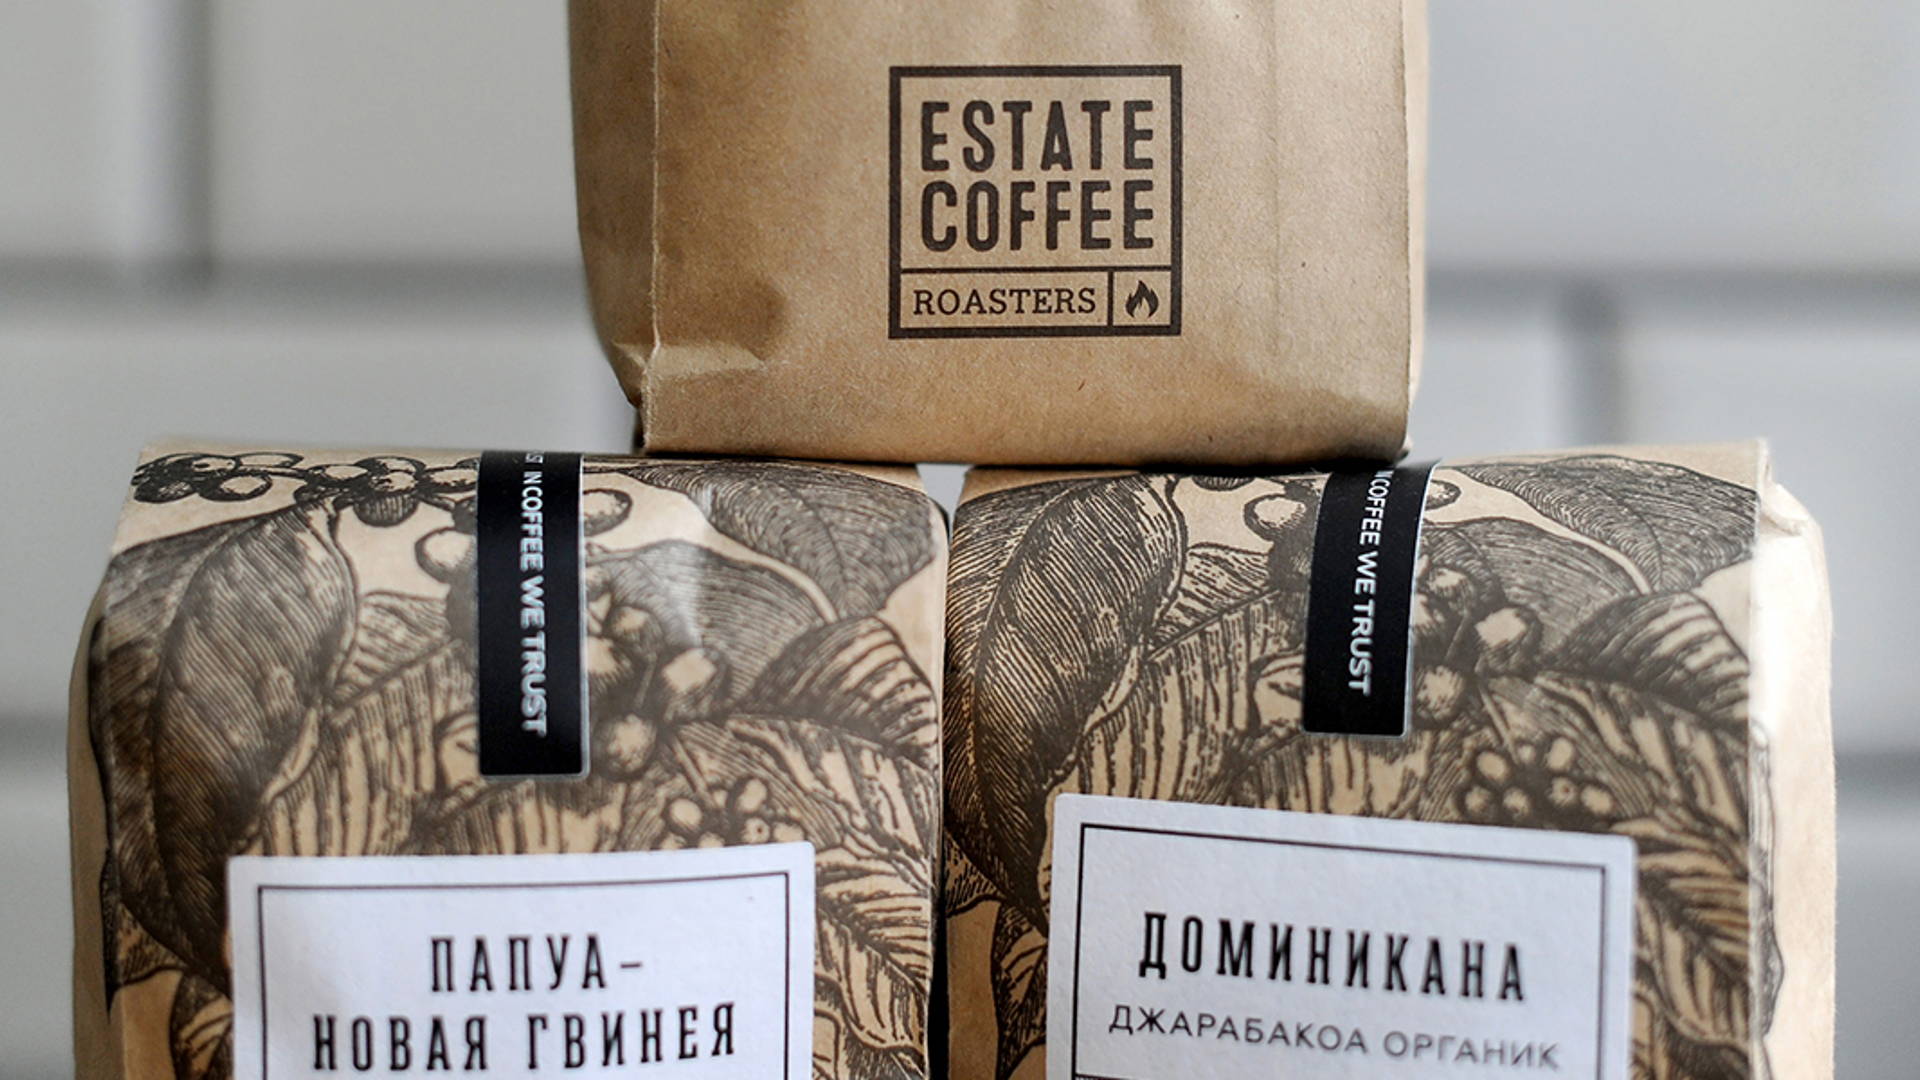 Featured image for Estate Coffee Roasters